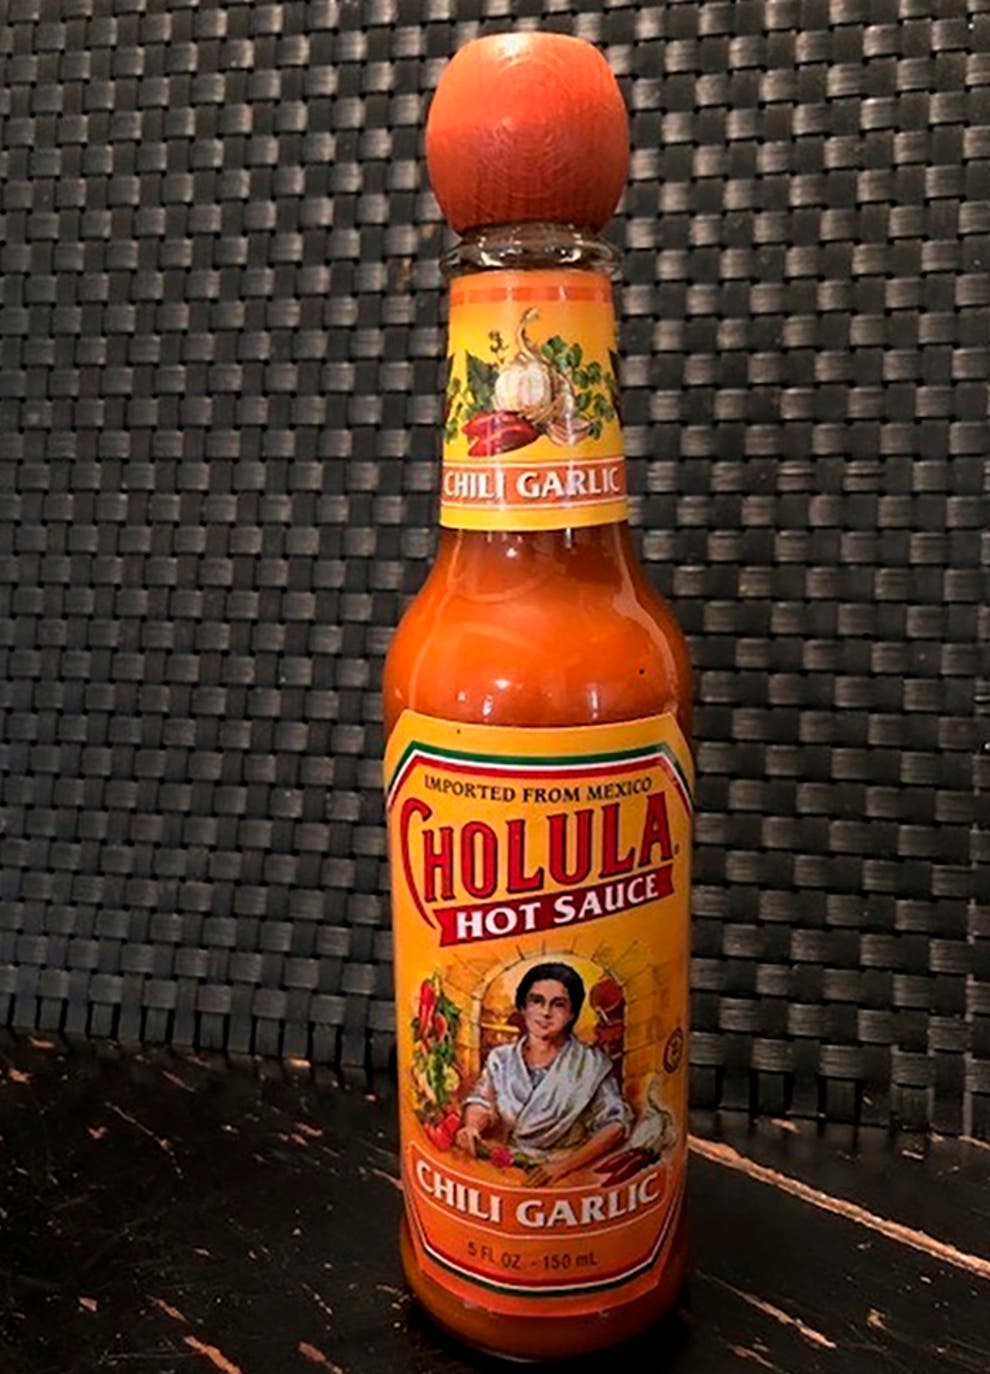 Iconic Cholula hot sauce is snapped up for $800m | The Independent